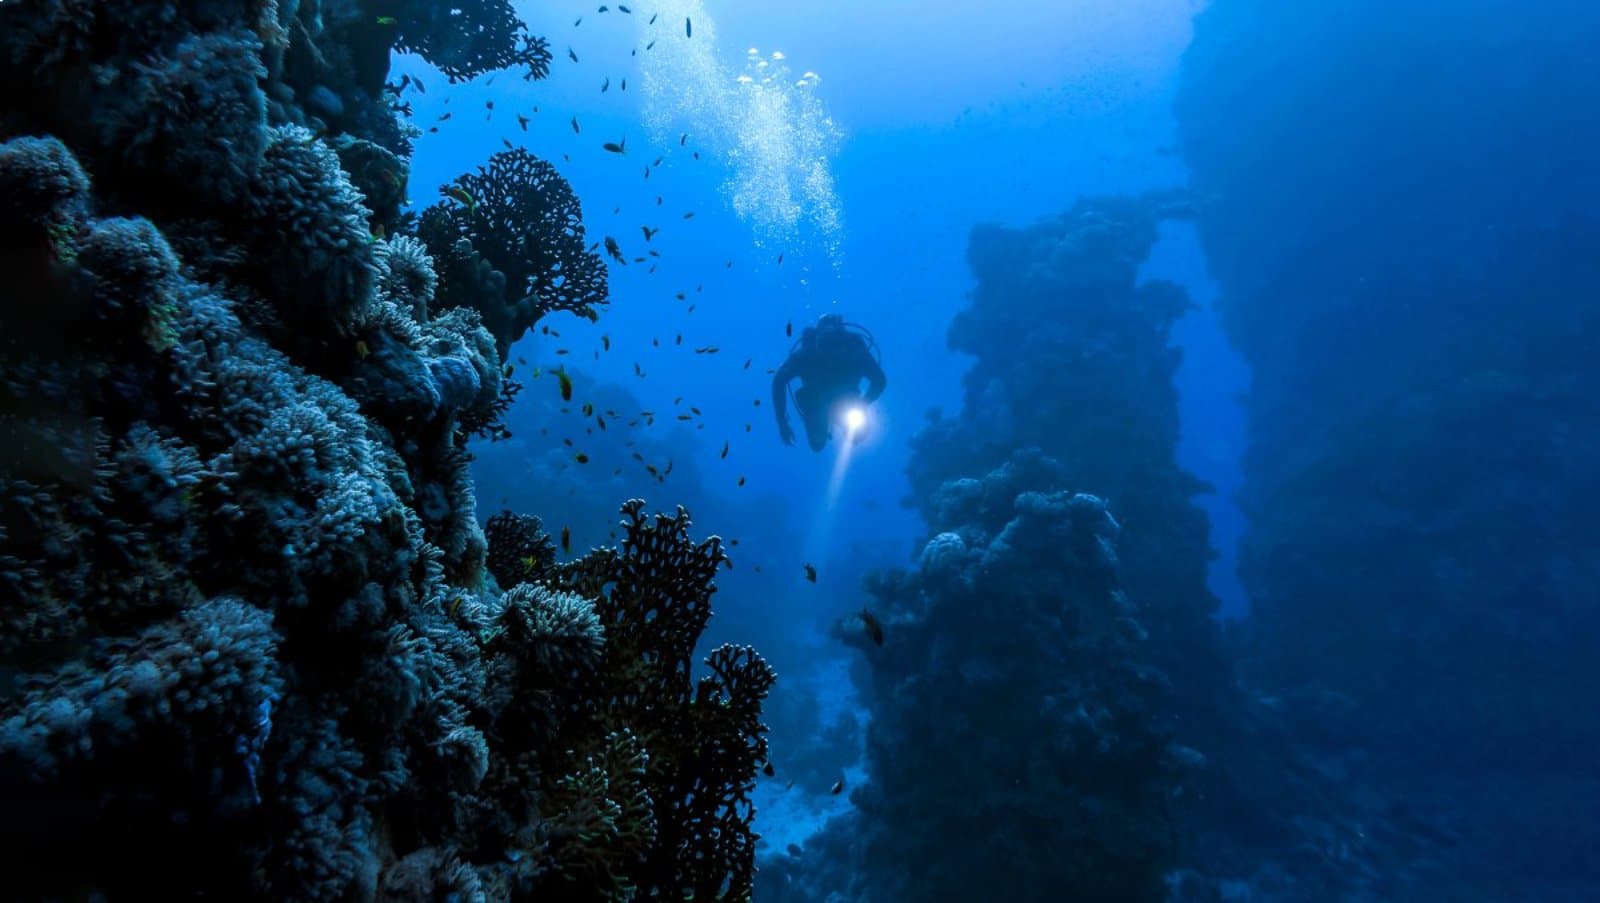 <p class="wp-caption-text">Image Credit: Shutterstock / Lillac</p>  <p><span>Deep diving allows adventurous divers to explore beyond the limits of recreational diving depths, offering the chance to discover untouched wrecks, deep reefs, and pelagic marine life. It requires additional training, experience, and respect for the increased risks associated with deeper depths.</span></p> <p><b>Insider’s Tip:</b><span> Pursue advanced and deep diver certifications through reputable diving organizations. Gradually gaining experience and diving within your limits are key to enjoying deep diving safely.</span></p>